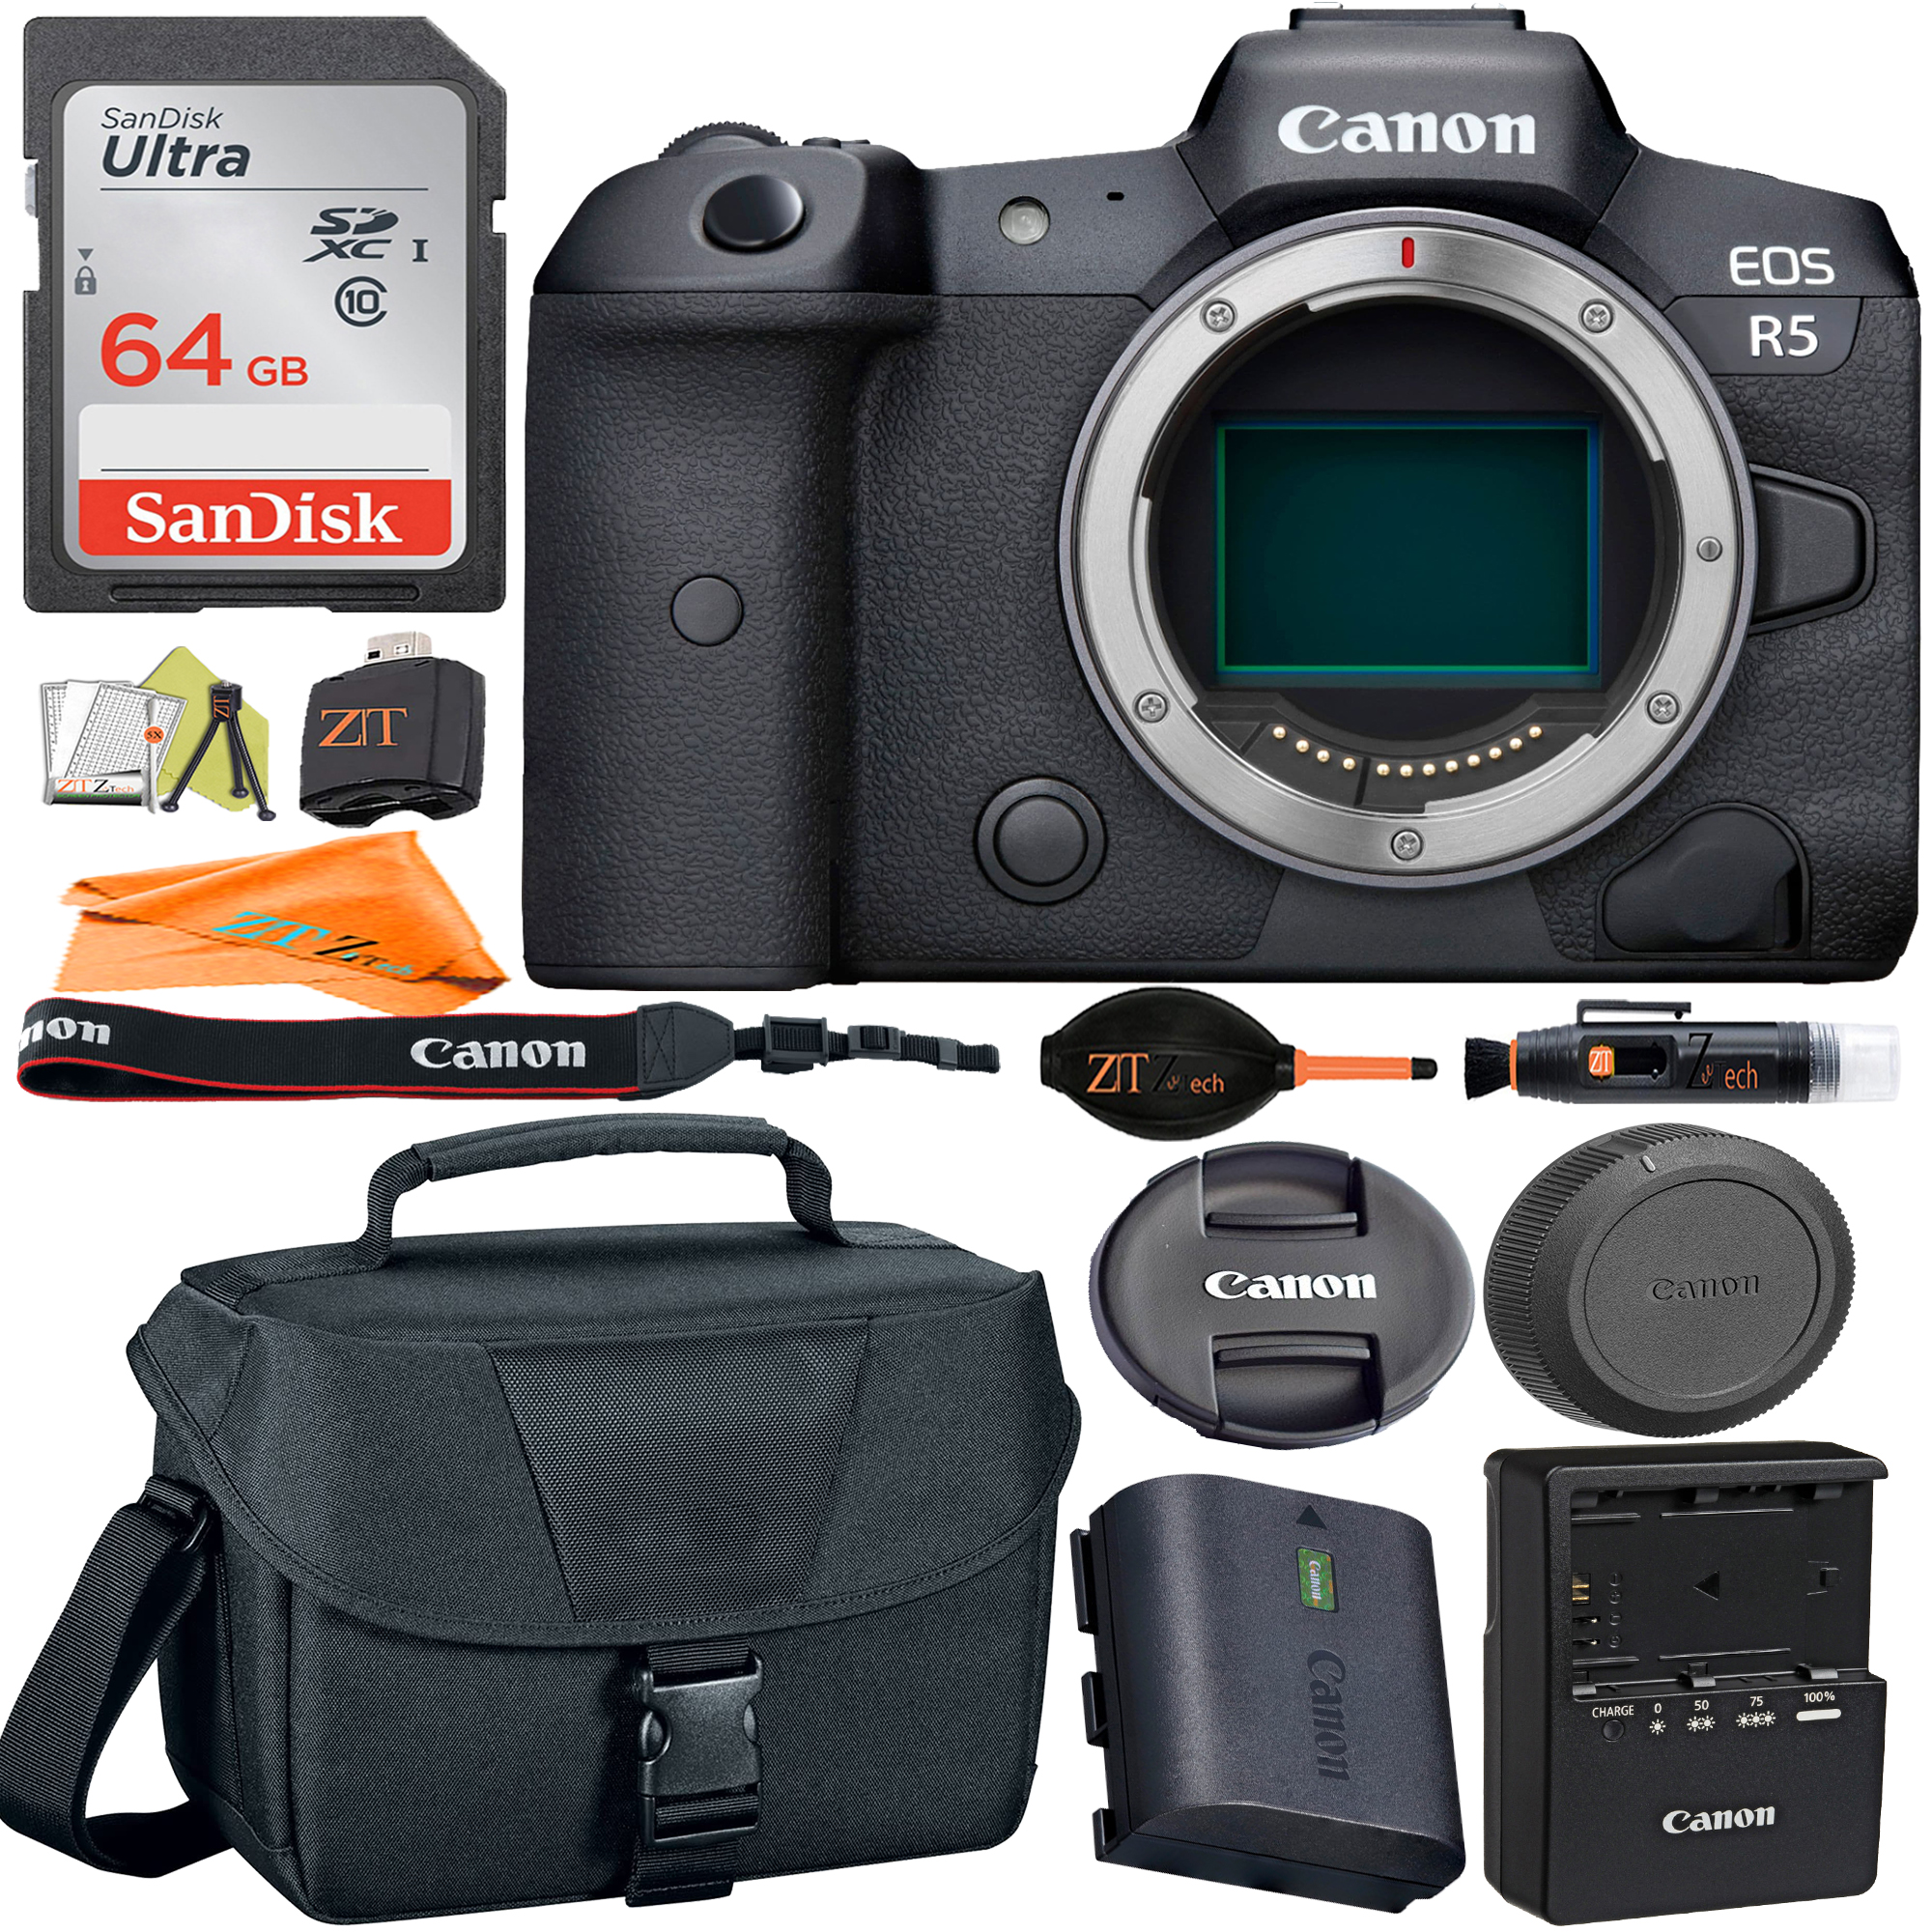 Canon EOS R5 Mirrorless Digital Camera (Body Only) Full-Frame with SanDisk 64GB + Case + ZeeTech Accessory Bundle